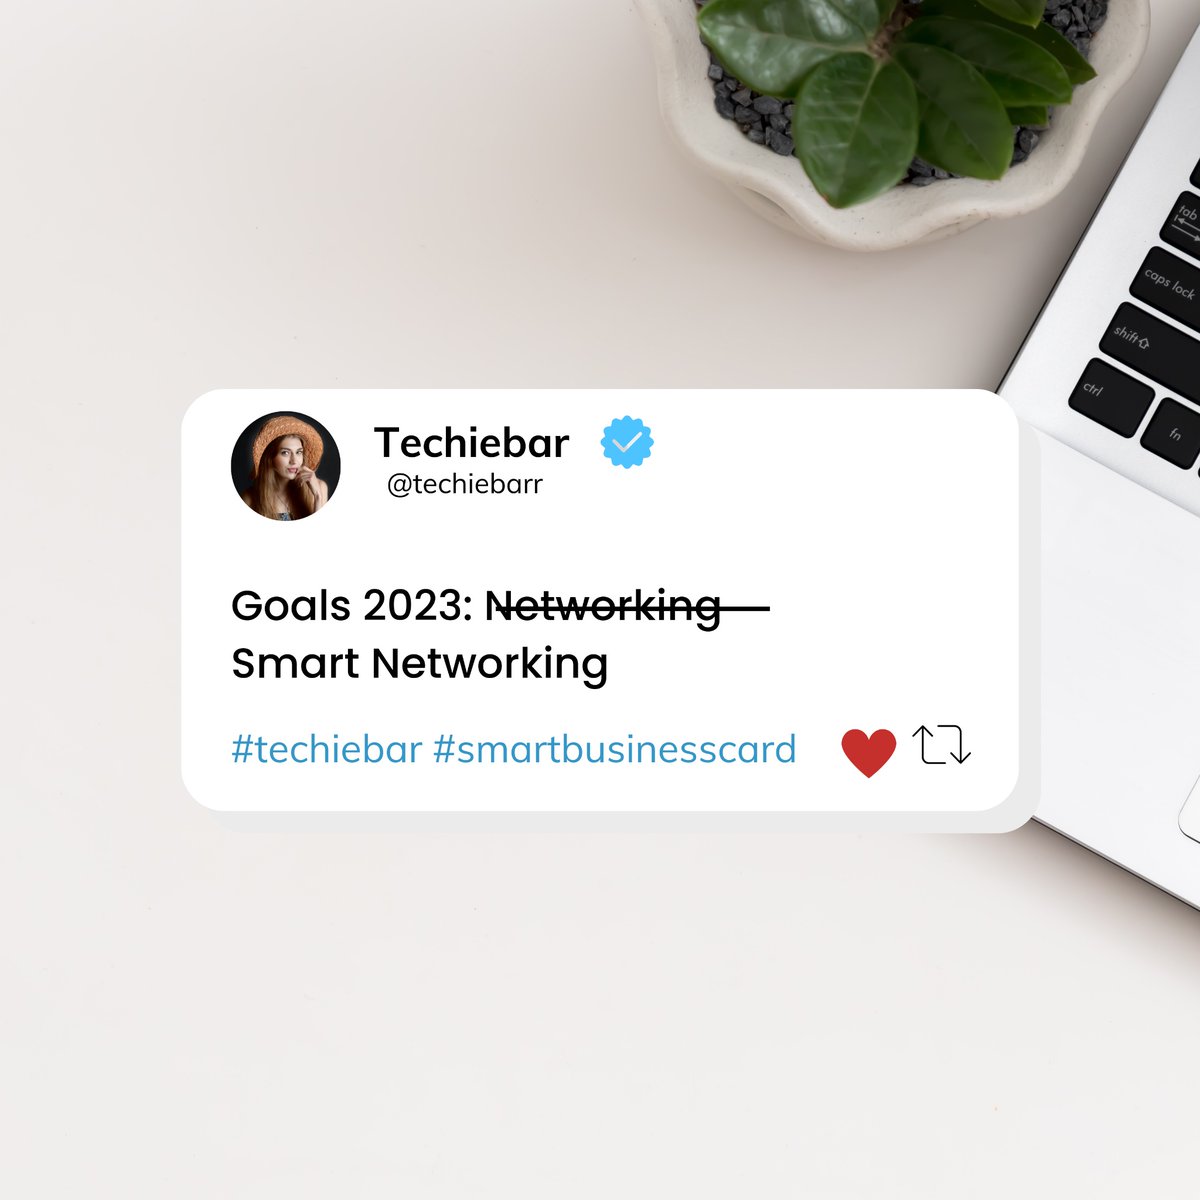 Switching to the smarter and quicker way of networking is on top of our 2023 goals. What's yours? 

Network smarter with Techiebar.

Get yours now at Techiebar.co.in

#taptoshare #networking #smartbusinesscard #goals2023